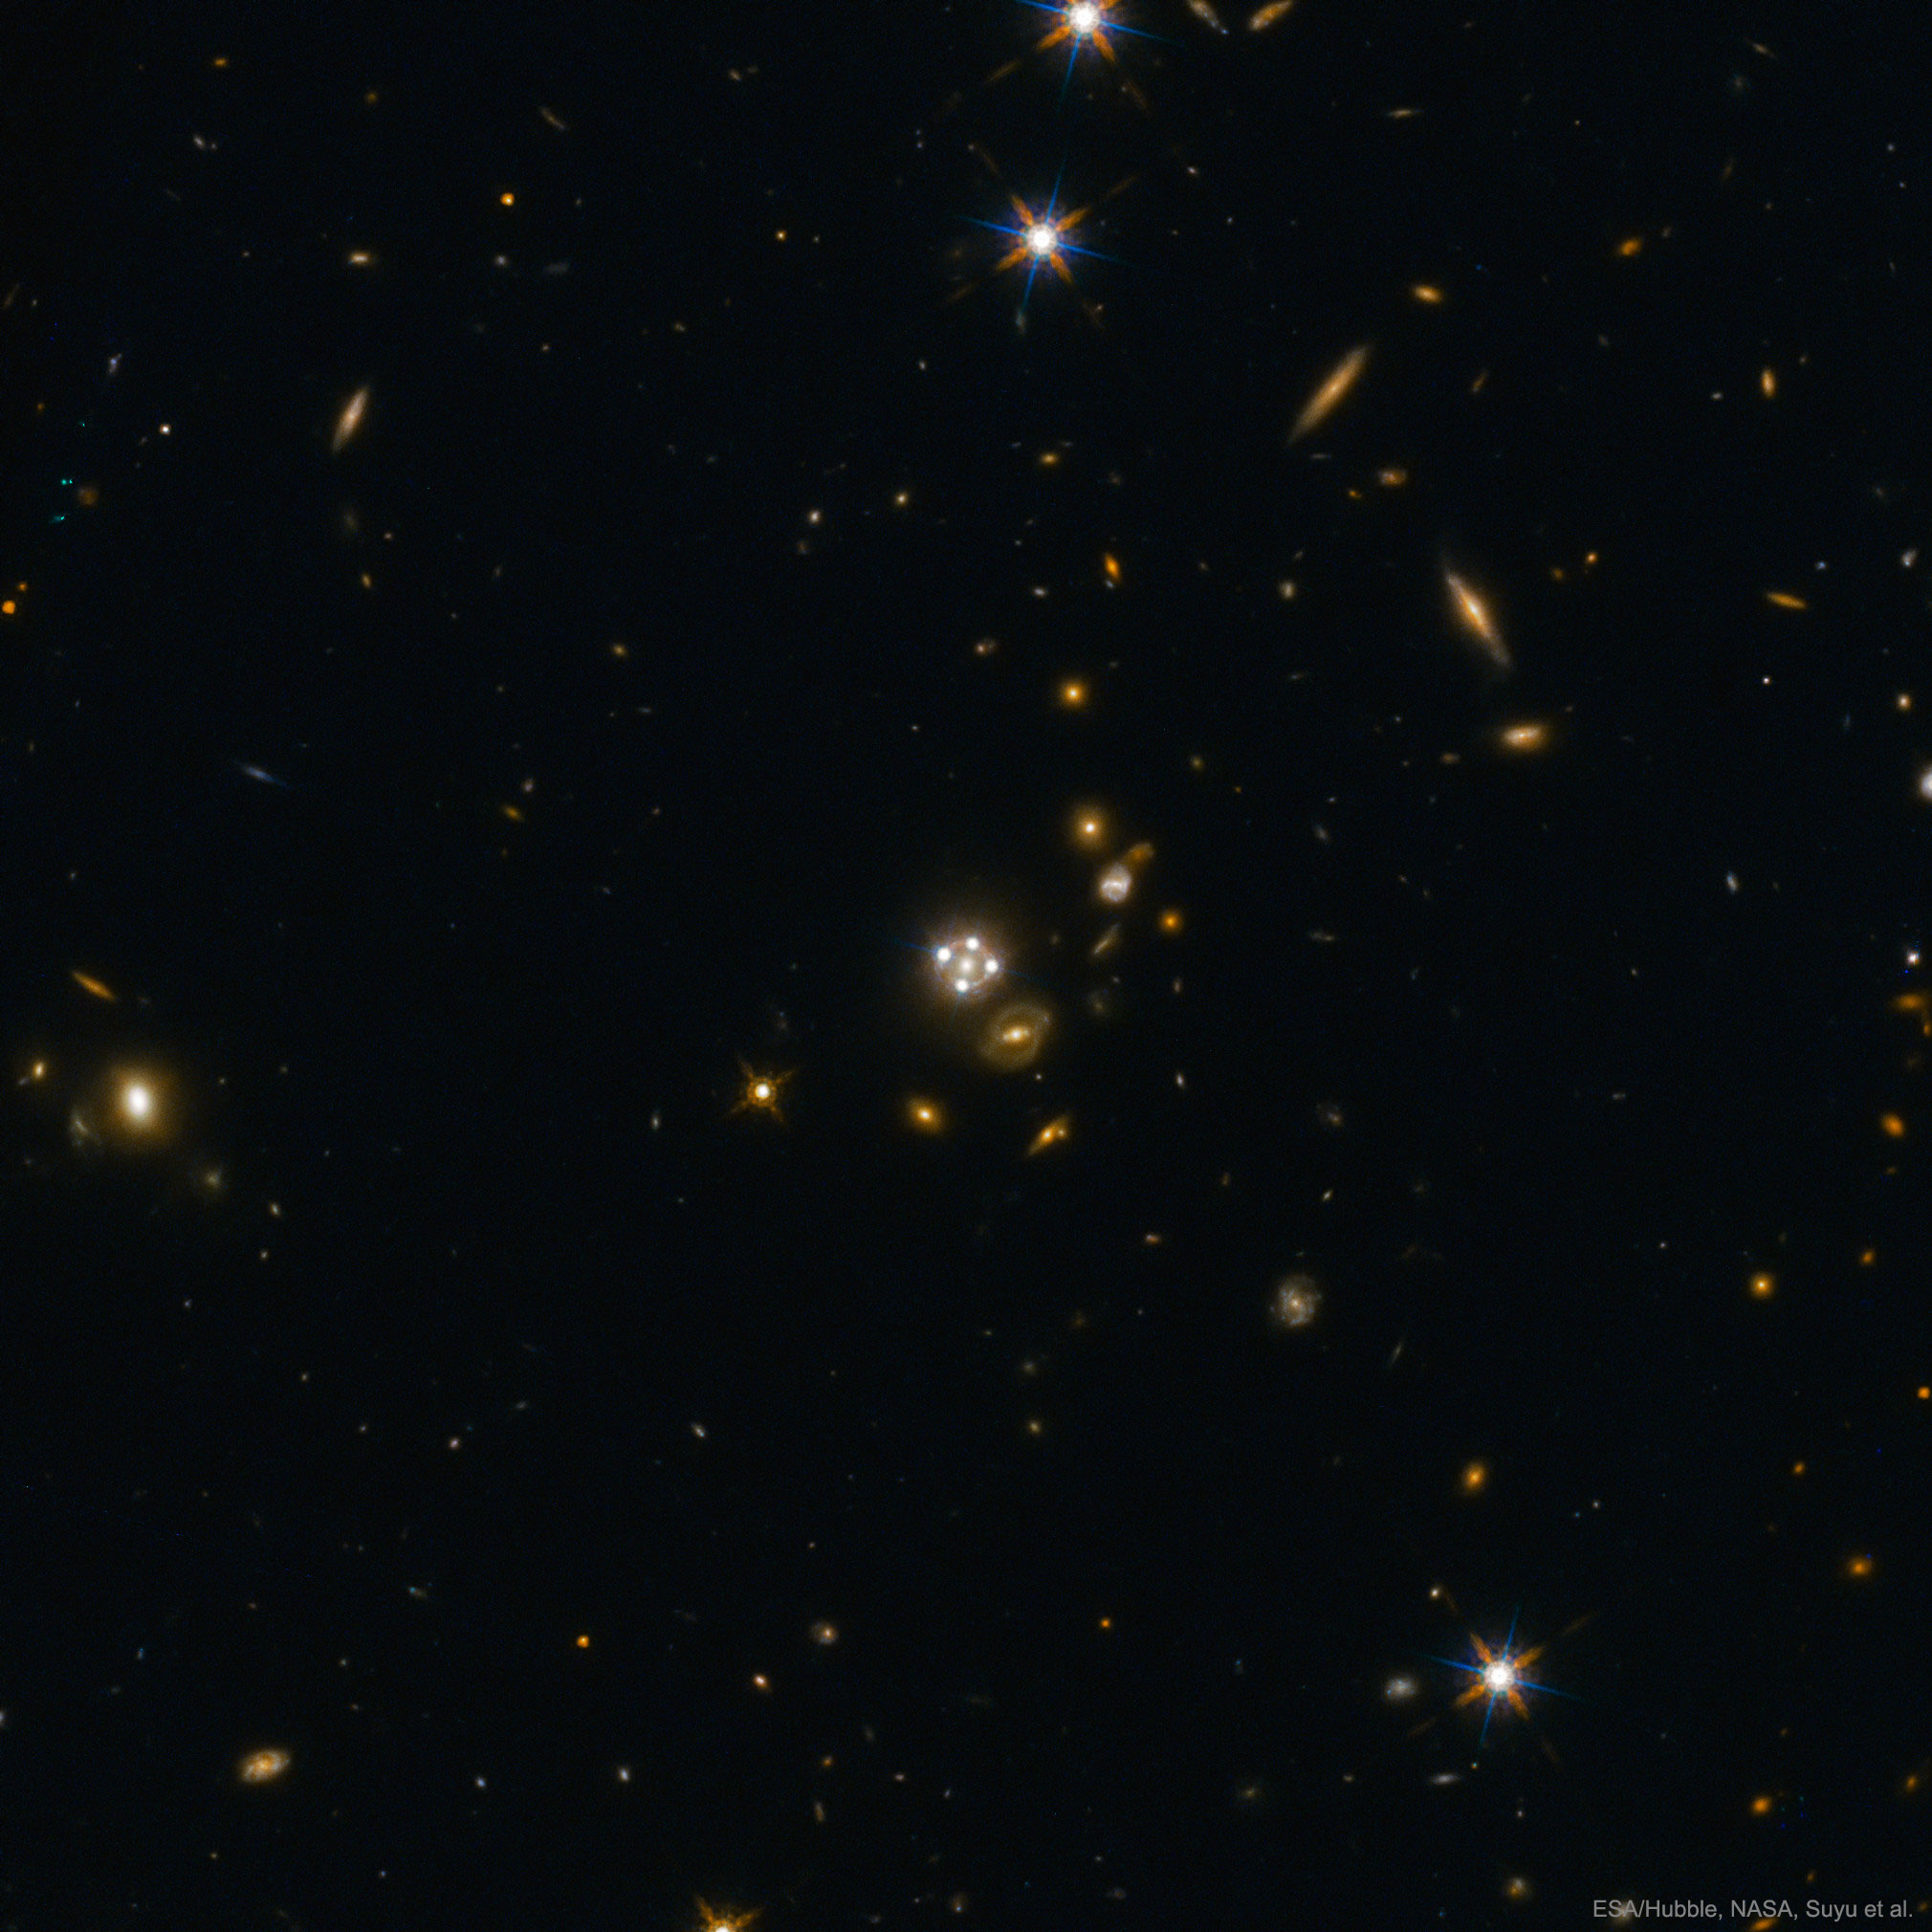 Astronomy Picture of the Day - Σελίδα 3 QuadQuasarLens_Hubble_2020